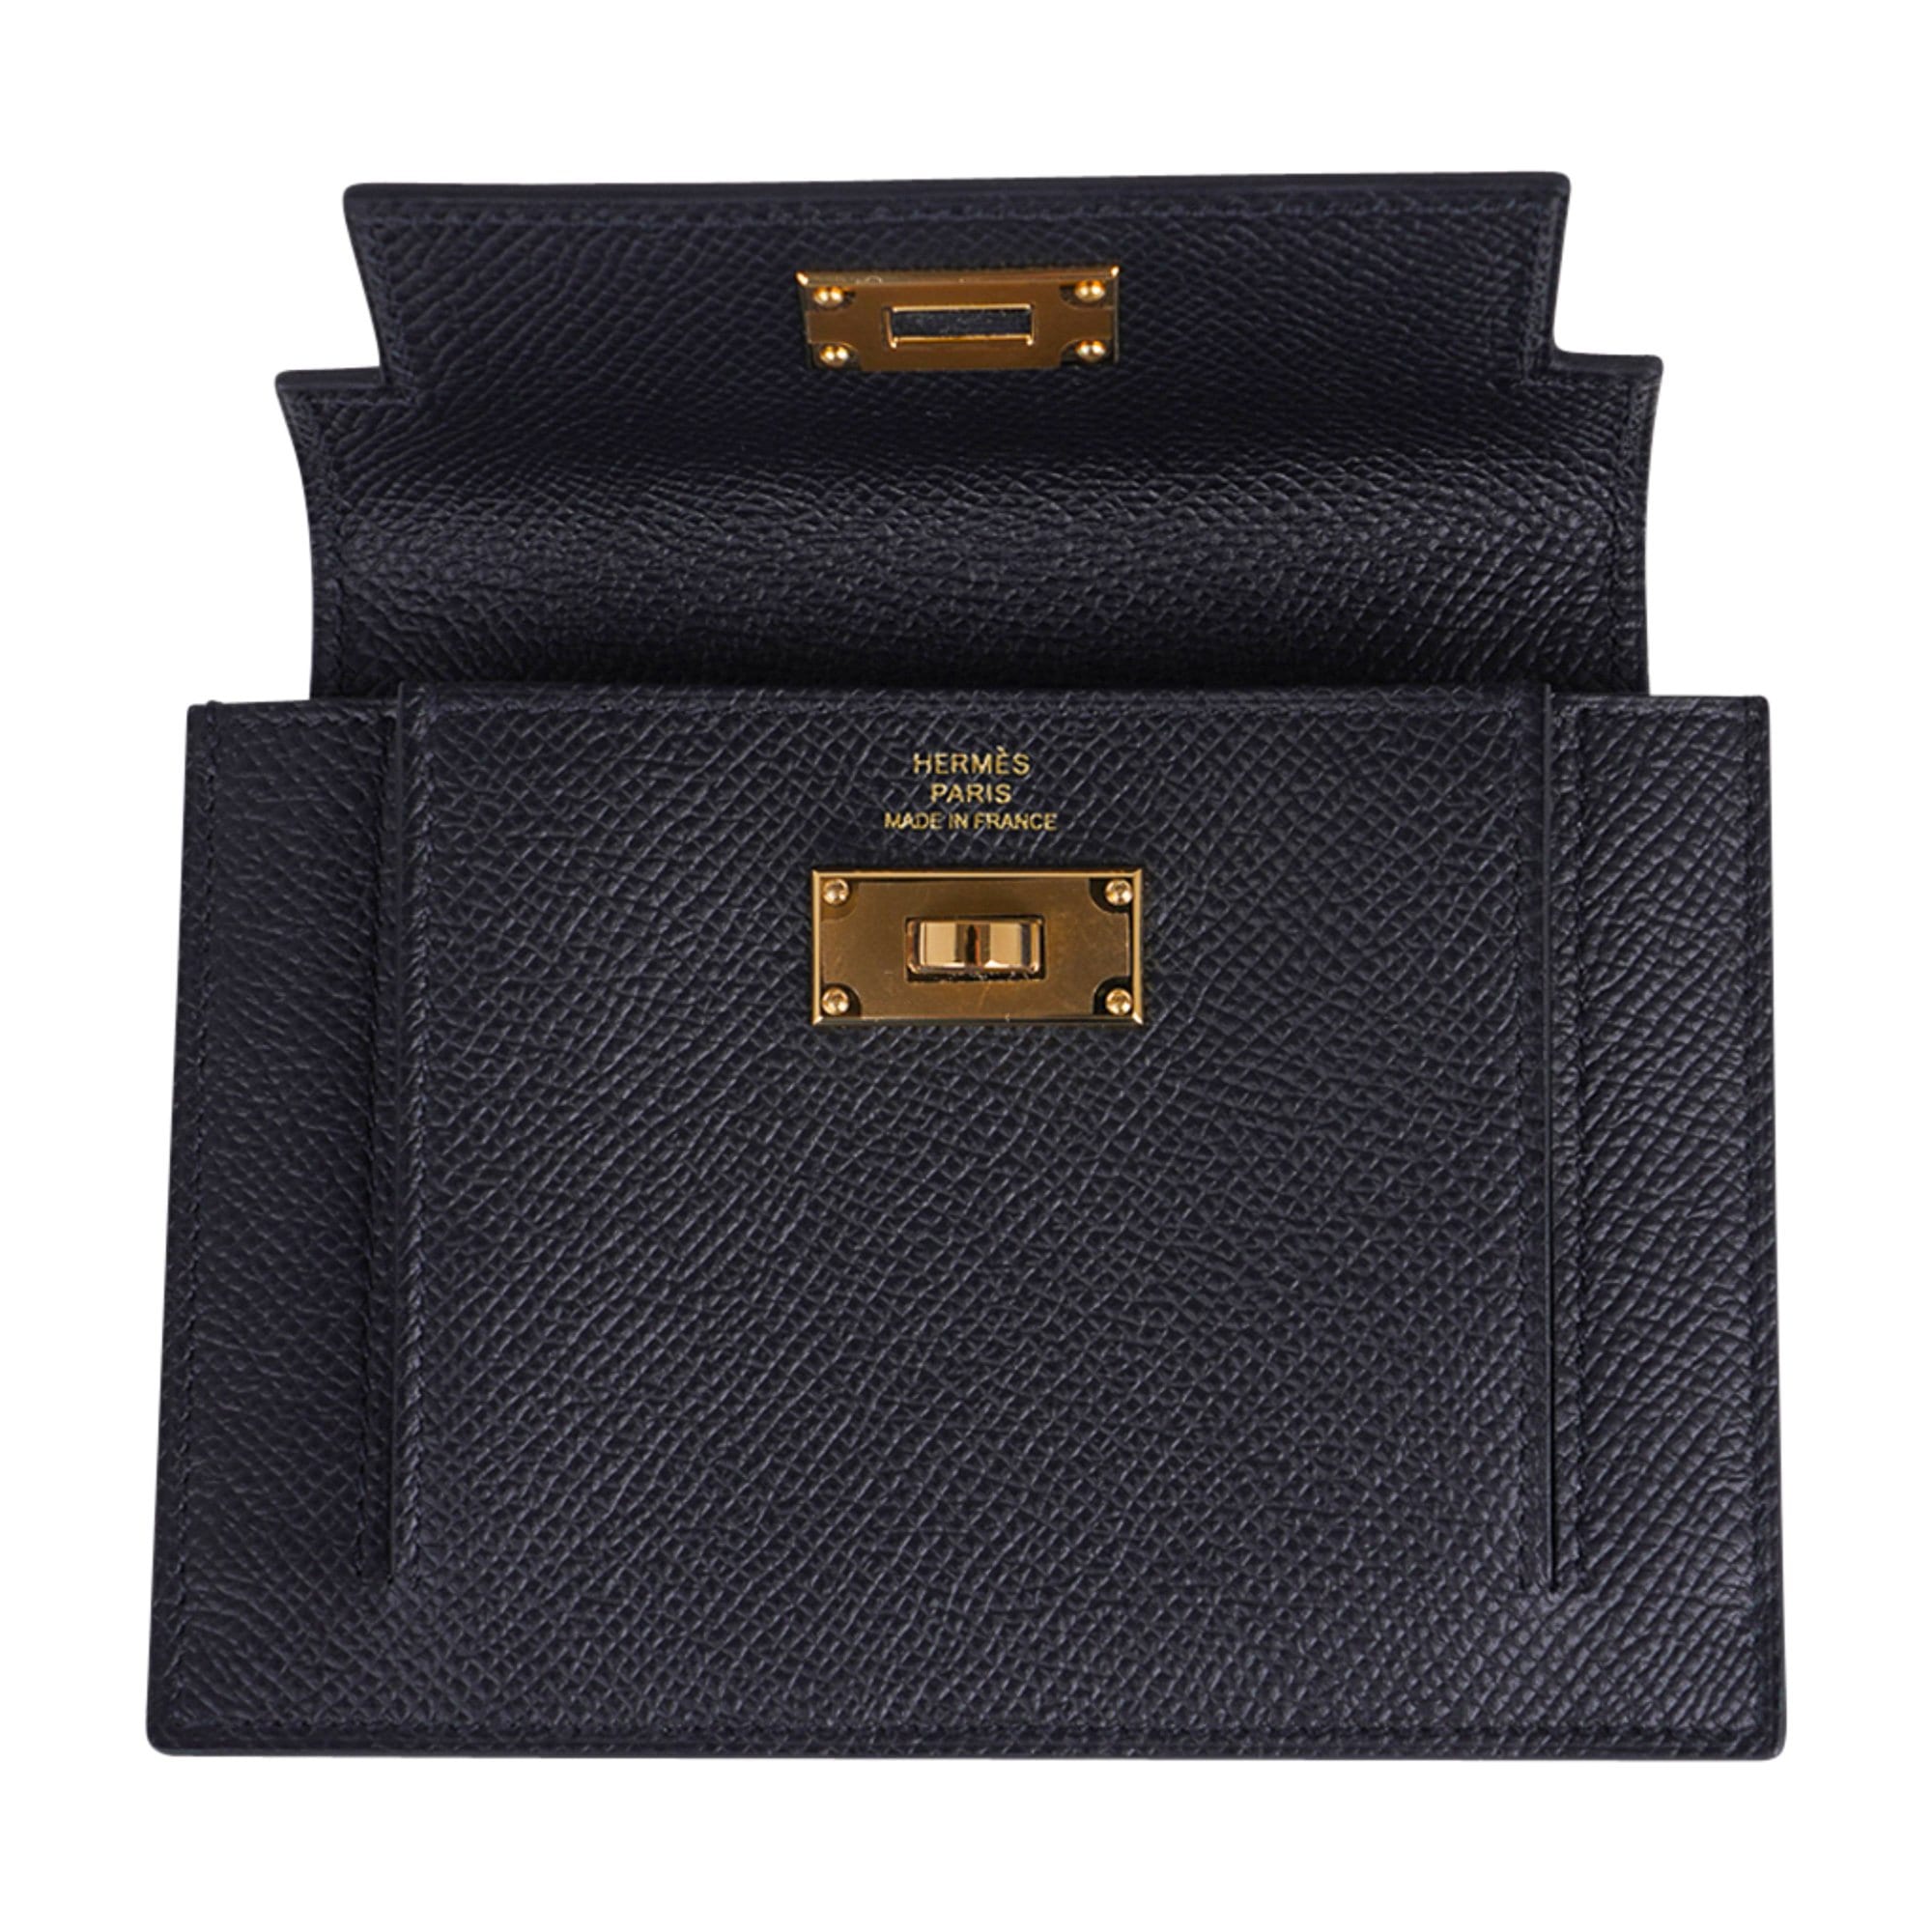 Hermes Kelly Pocket Compact Wallet Noir Gold Hardware New w/Box